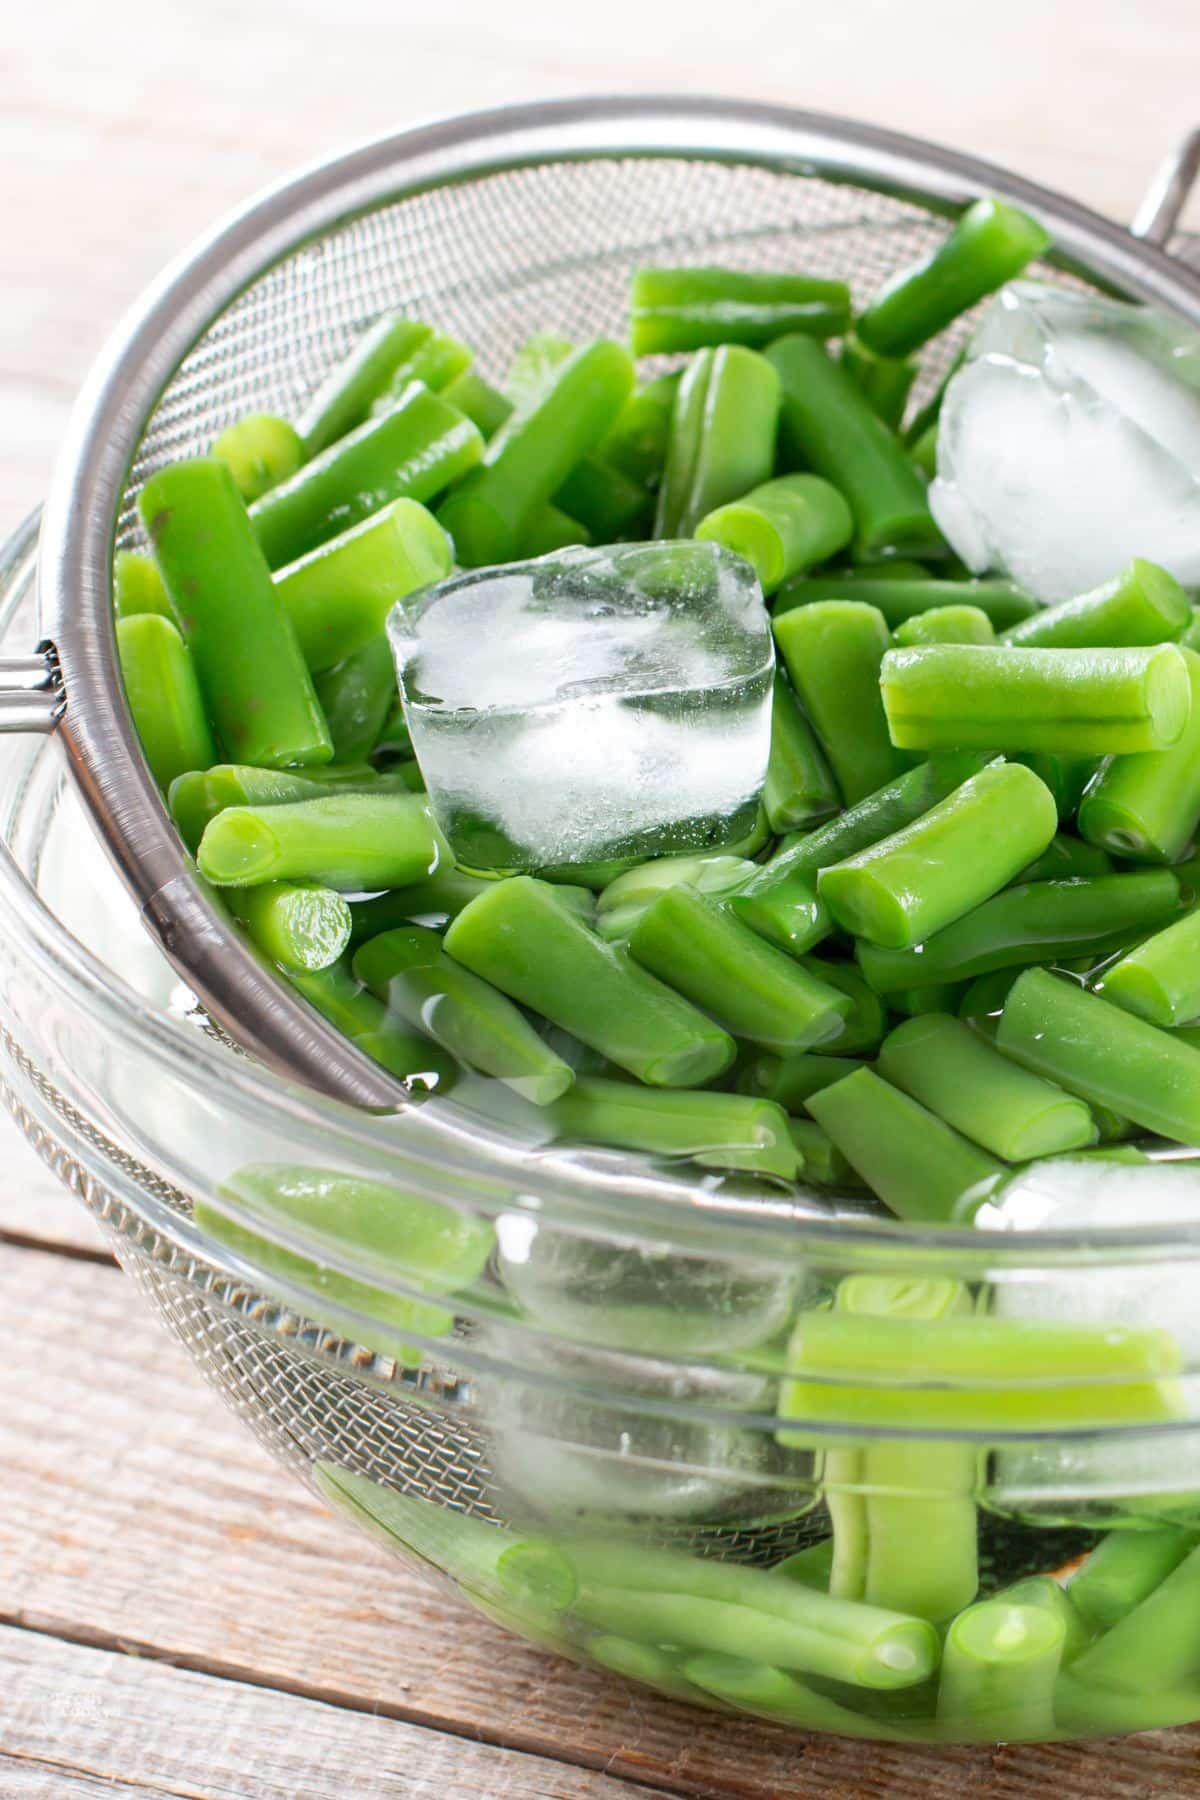 Blanched green beans in bowl of ice water.